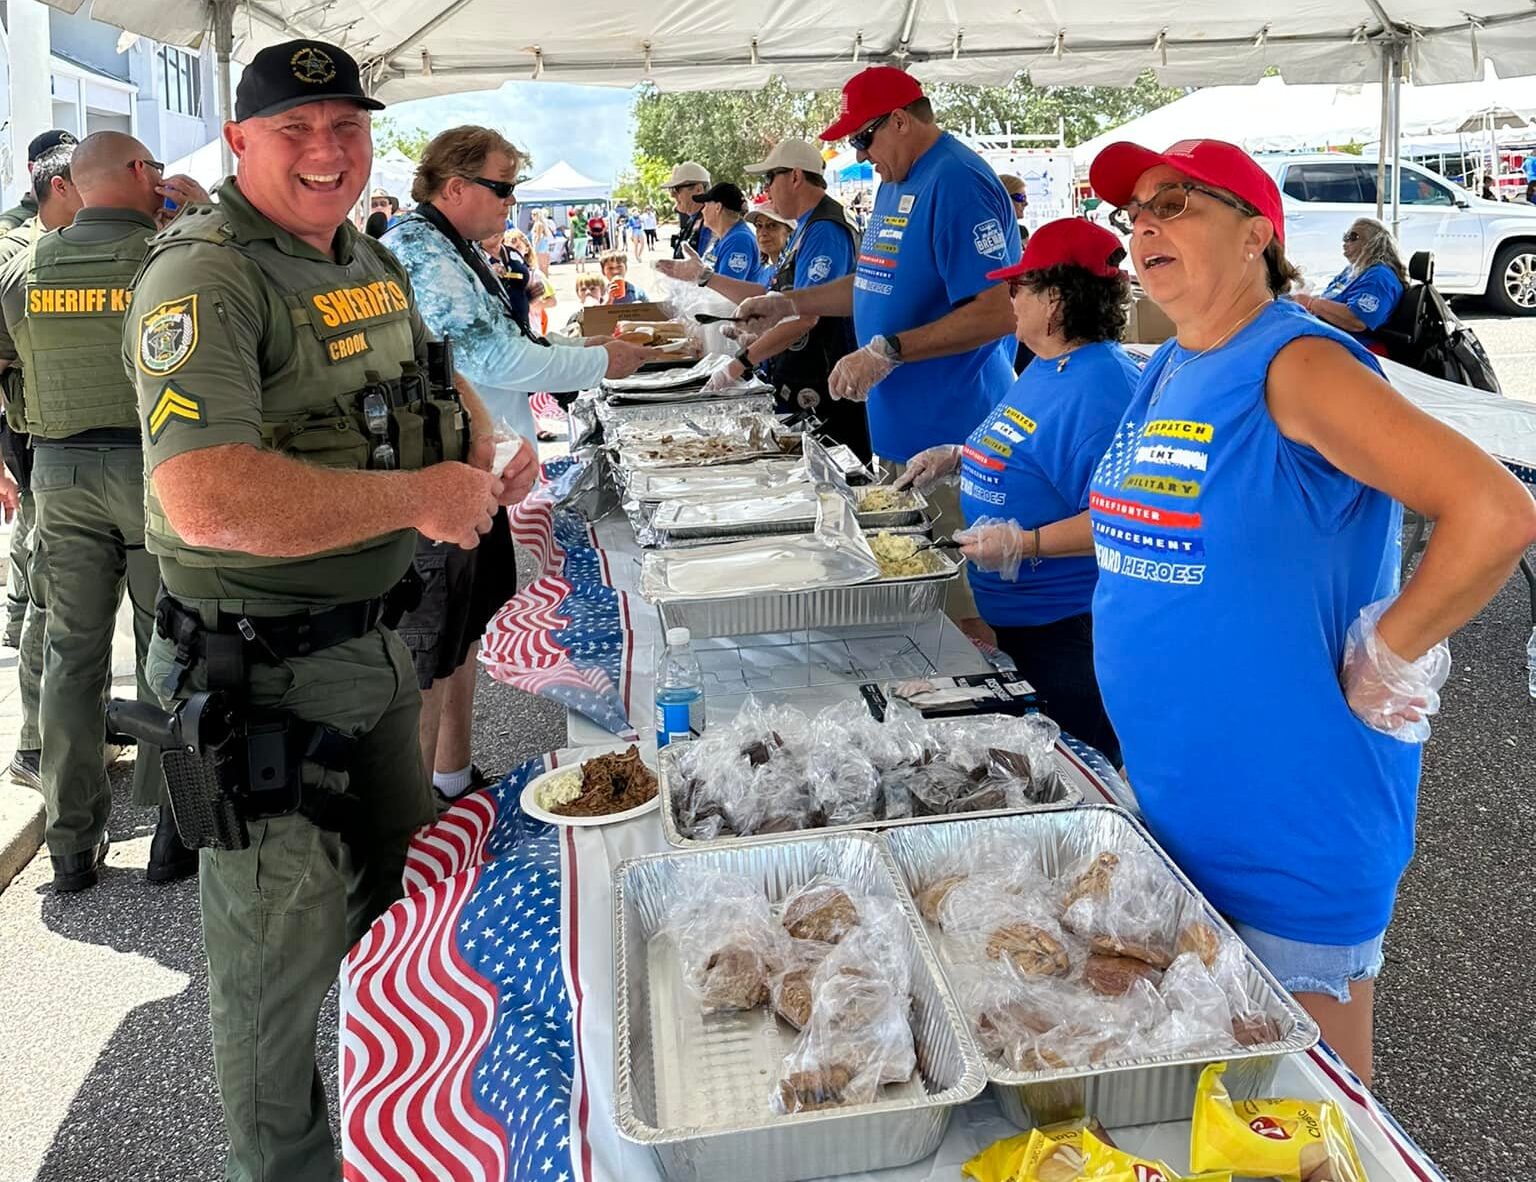 People dressed in matching blue t-shirts and red hats serve food to a smiling man in a uniform.